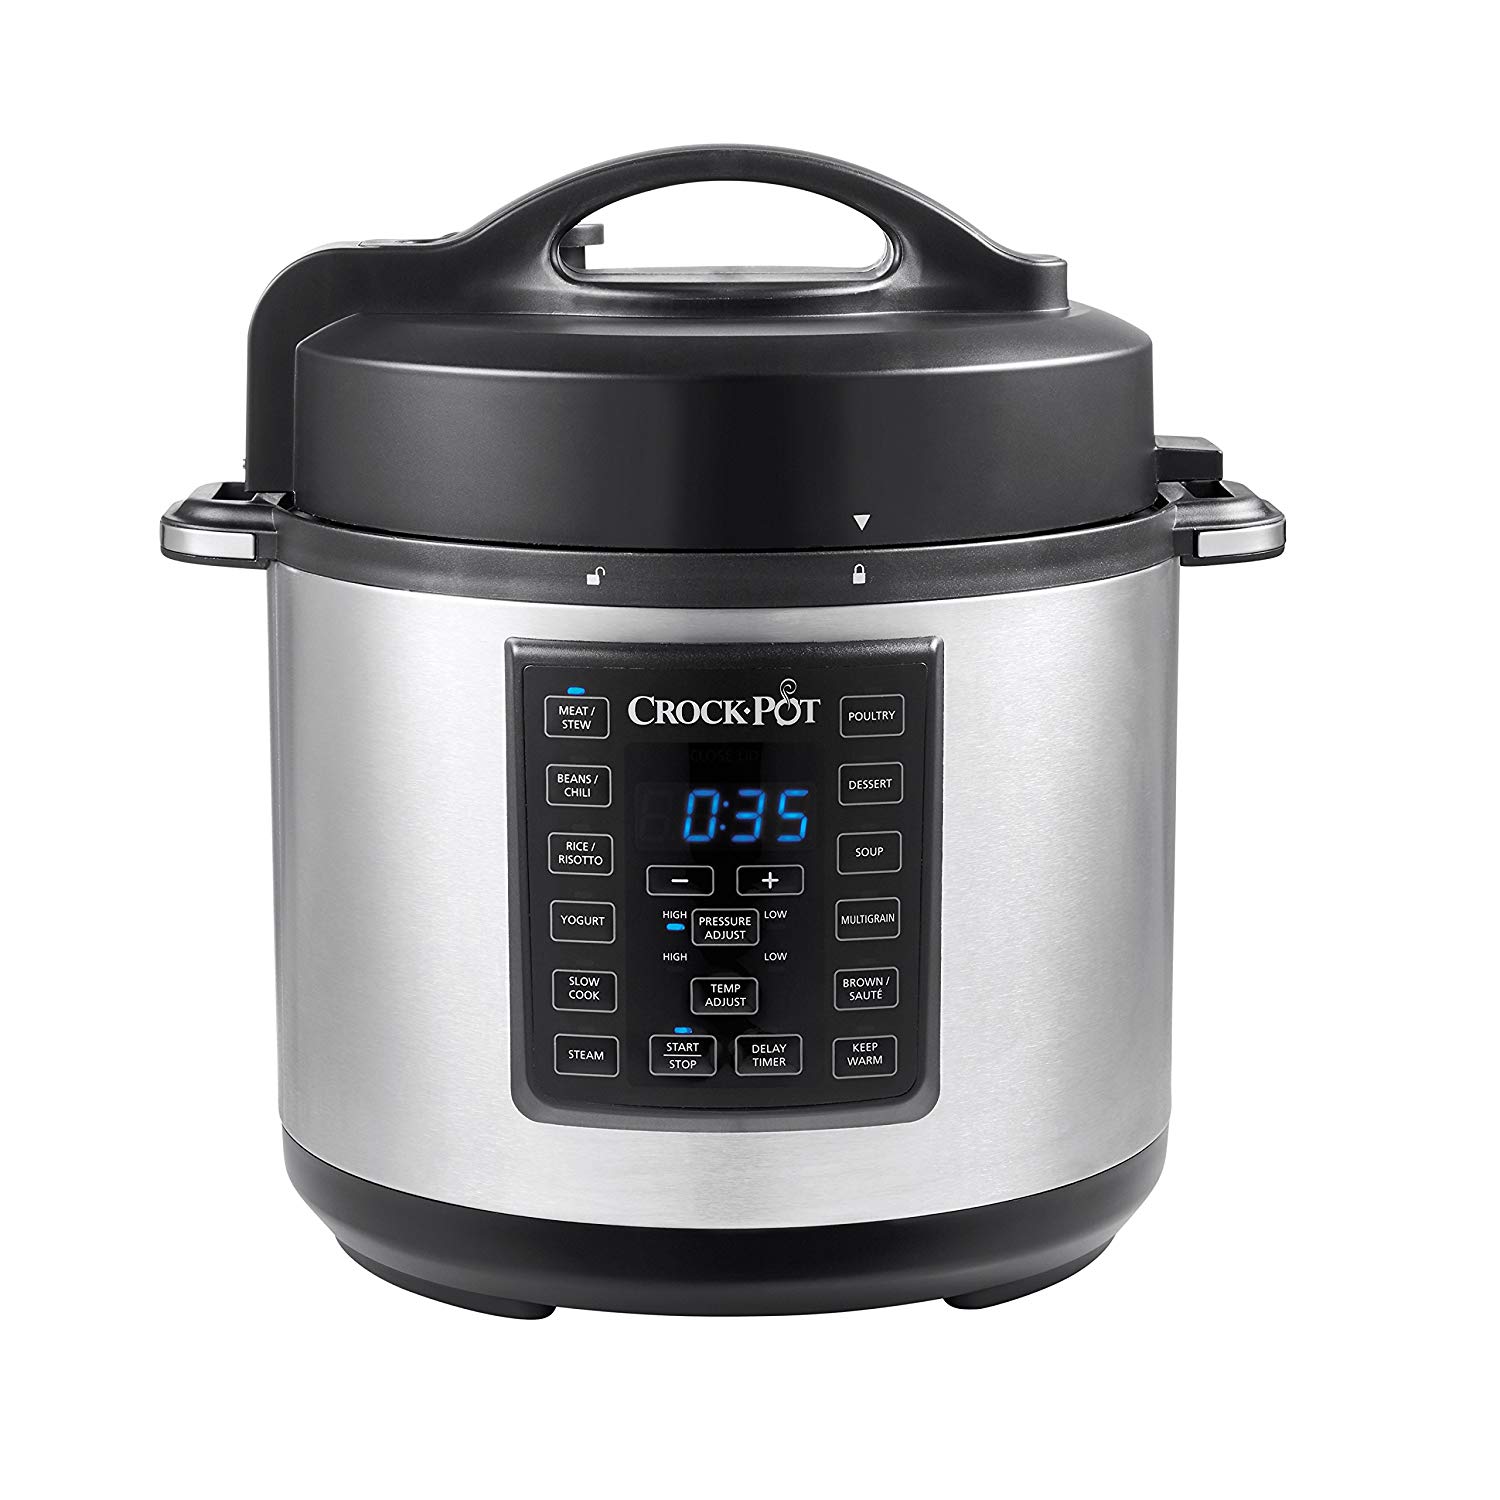 Crock-Pot 6 Qt 8-in-1 Multi-Use Express Crock Programmable Slow Cooker, Pressure Cooker, Saute, and Steamer, Stainless Steel